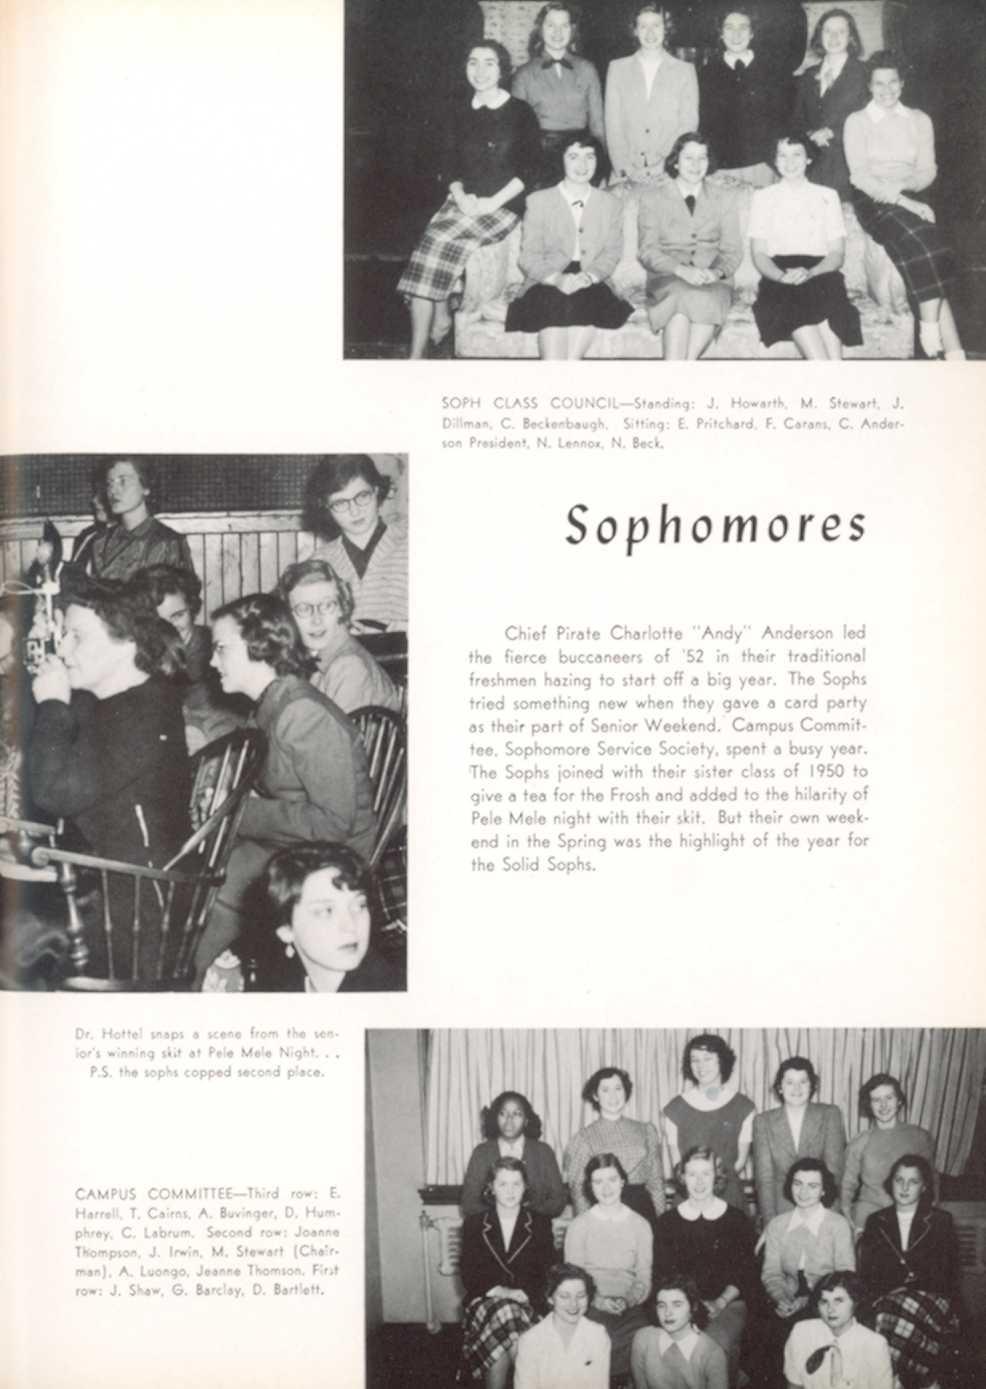 (Chairman), Dr mphrey, rson, Ande Carans, C President, N Lennox, N Beck t, Sophomore s Chief Pirate Charlotte "Andy" Anderson led the fierce buccaneers of '52 in their traditiona l freshmen hazing to